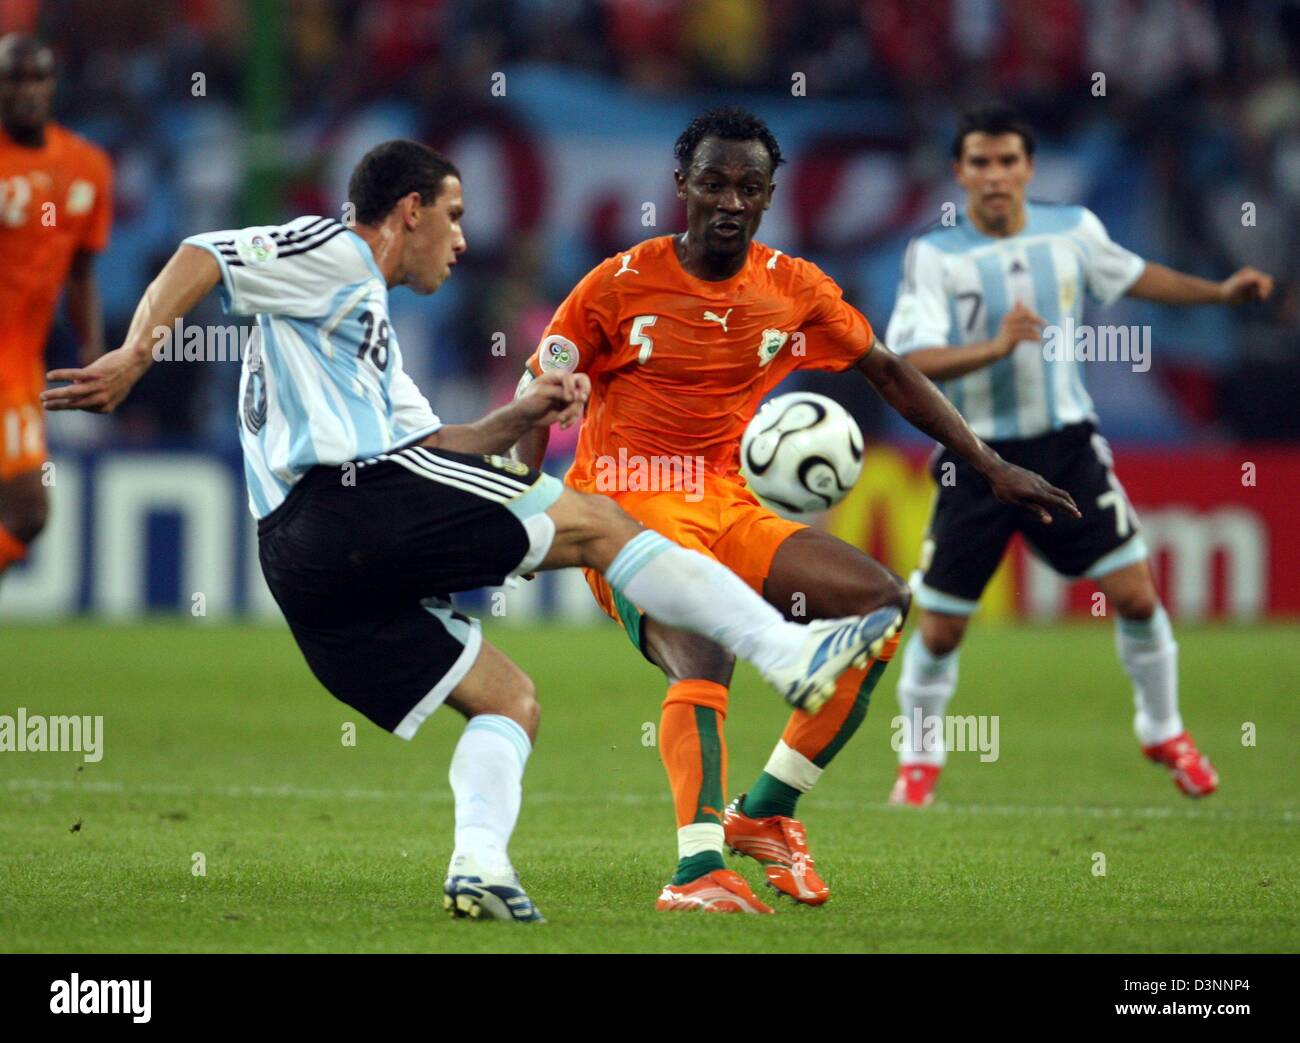 Argentinian international Maxi Rodriguez (L) vies for the ball with Didier Zokora (C) from Ivory Coast during the 2006 FIFA World Cup group C match of Argentina vs Ivory Coast in Hamburg, Germany,  Saturday, 10 June 2006. DPA/KAY NIETFELD +++ Mobile Services OUT +++ Please also refer to FIFA's Terms and Conditions. +++(c) dpa - Bildfunk+++ Stock Photo